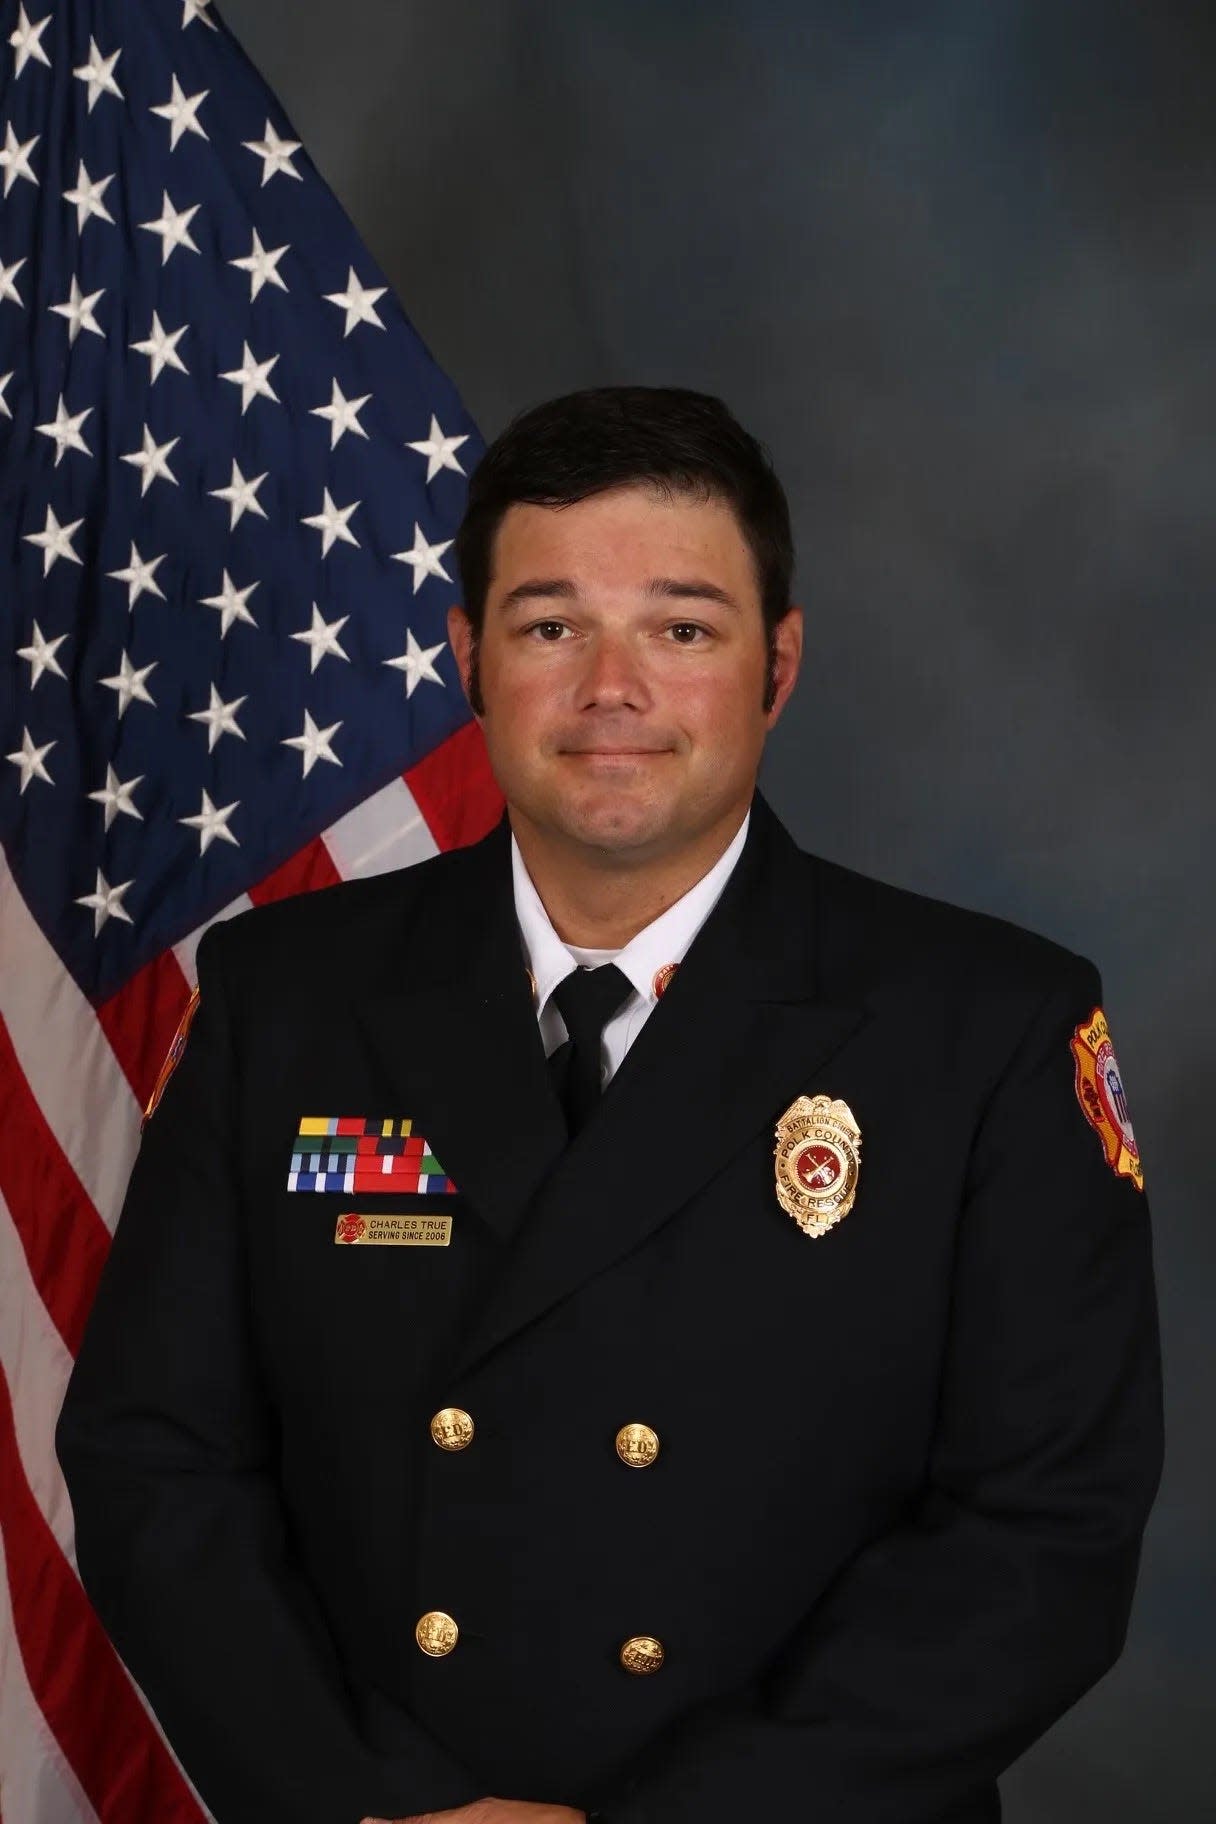 Fire Captain Charle True was recently demoted from battalion chief with Polk County Fire Rescue